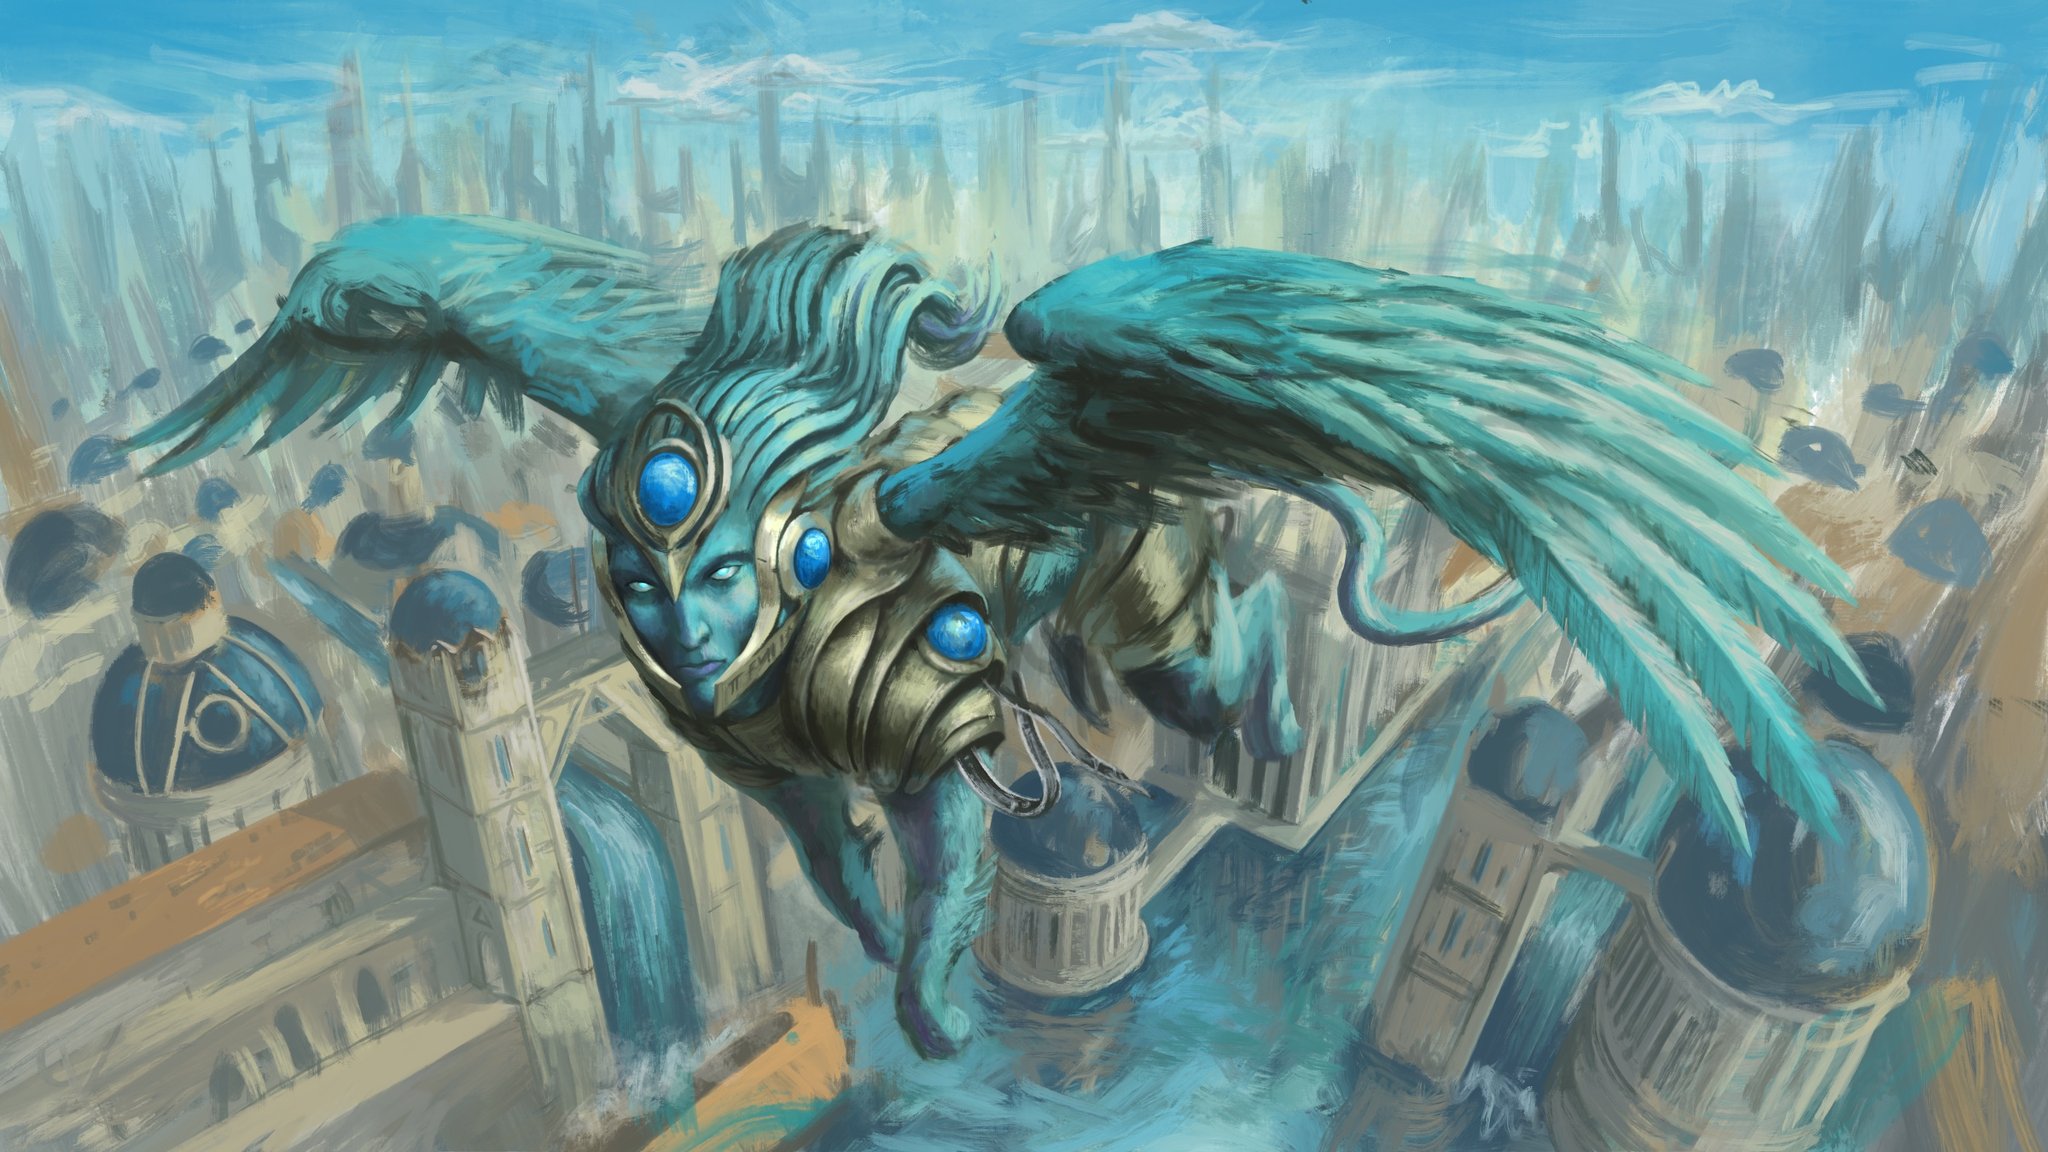 Kevin mckenna on at some point i wanted an azorius deck no idea who the mander would be but i went ahead making a consecrated sphinx for it artcleanse httpstcoozomzytxo